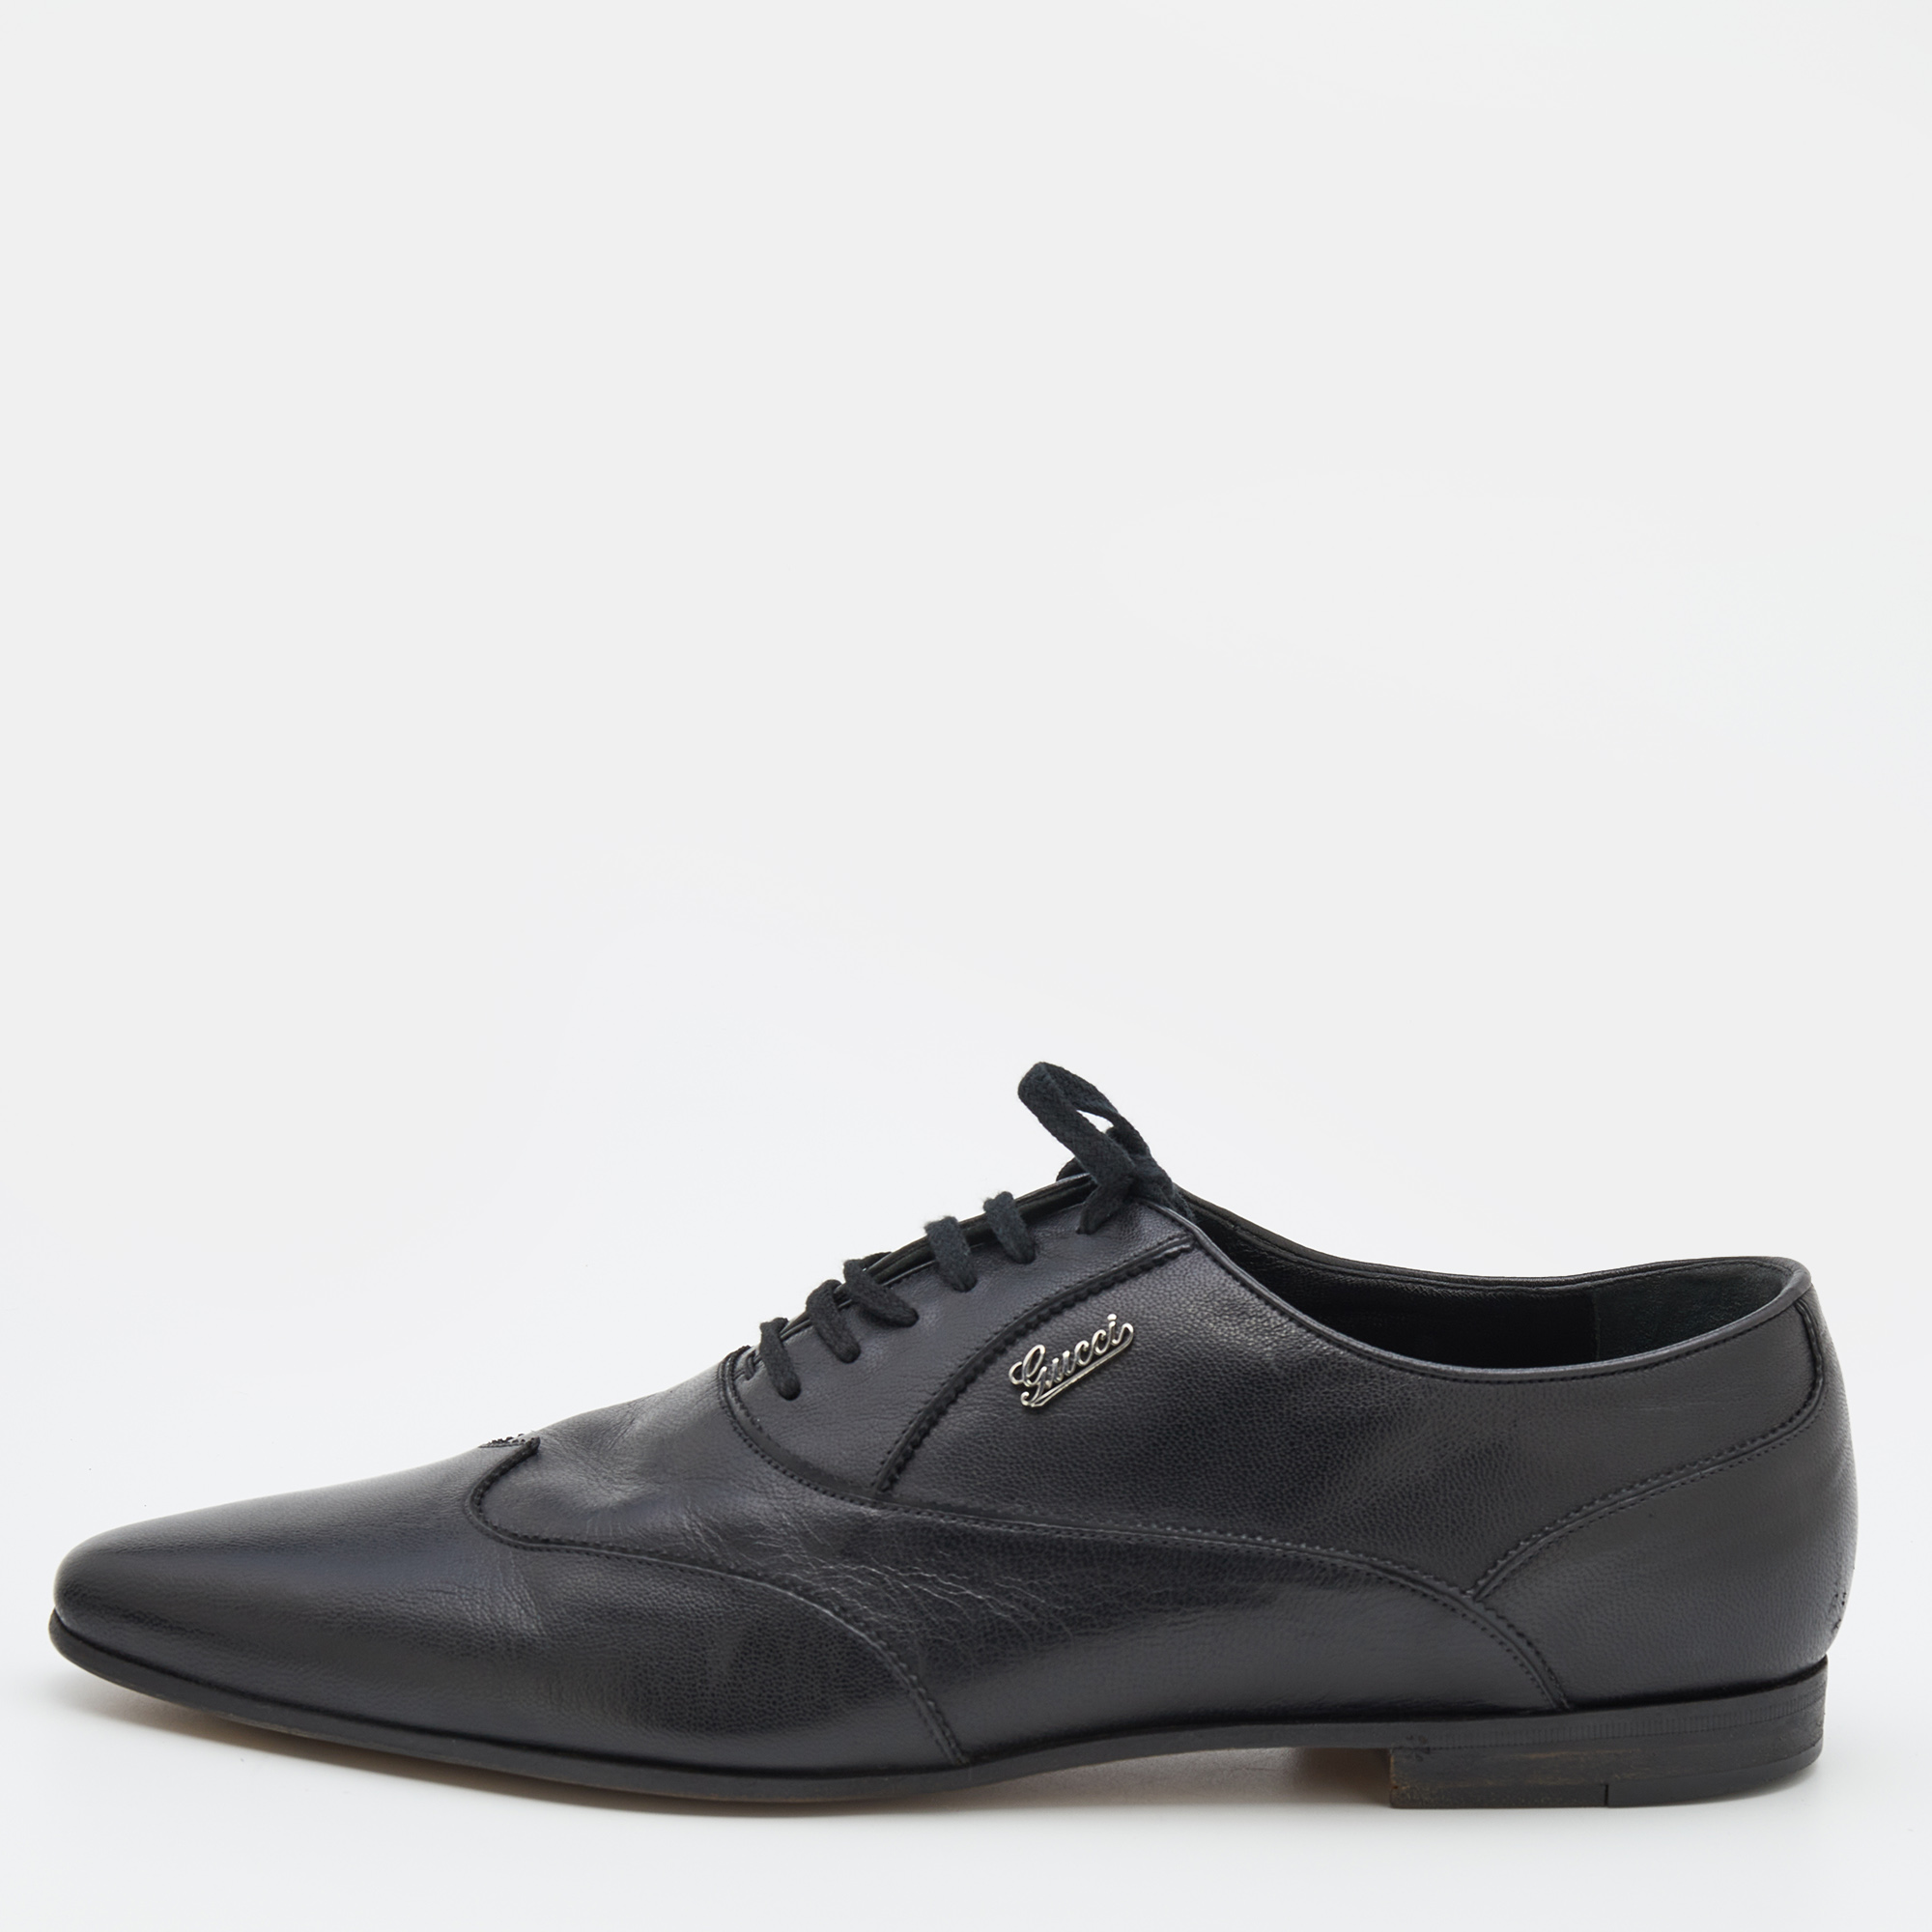 Pre-owned Gucci Black Leather Wingtip Lace Up Oxfords Size 43